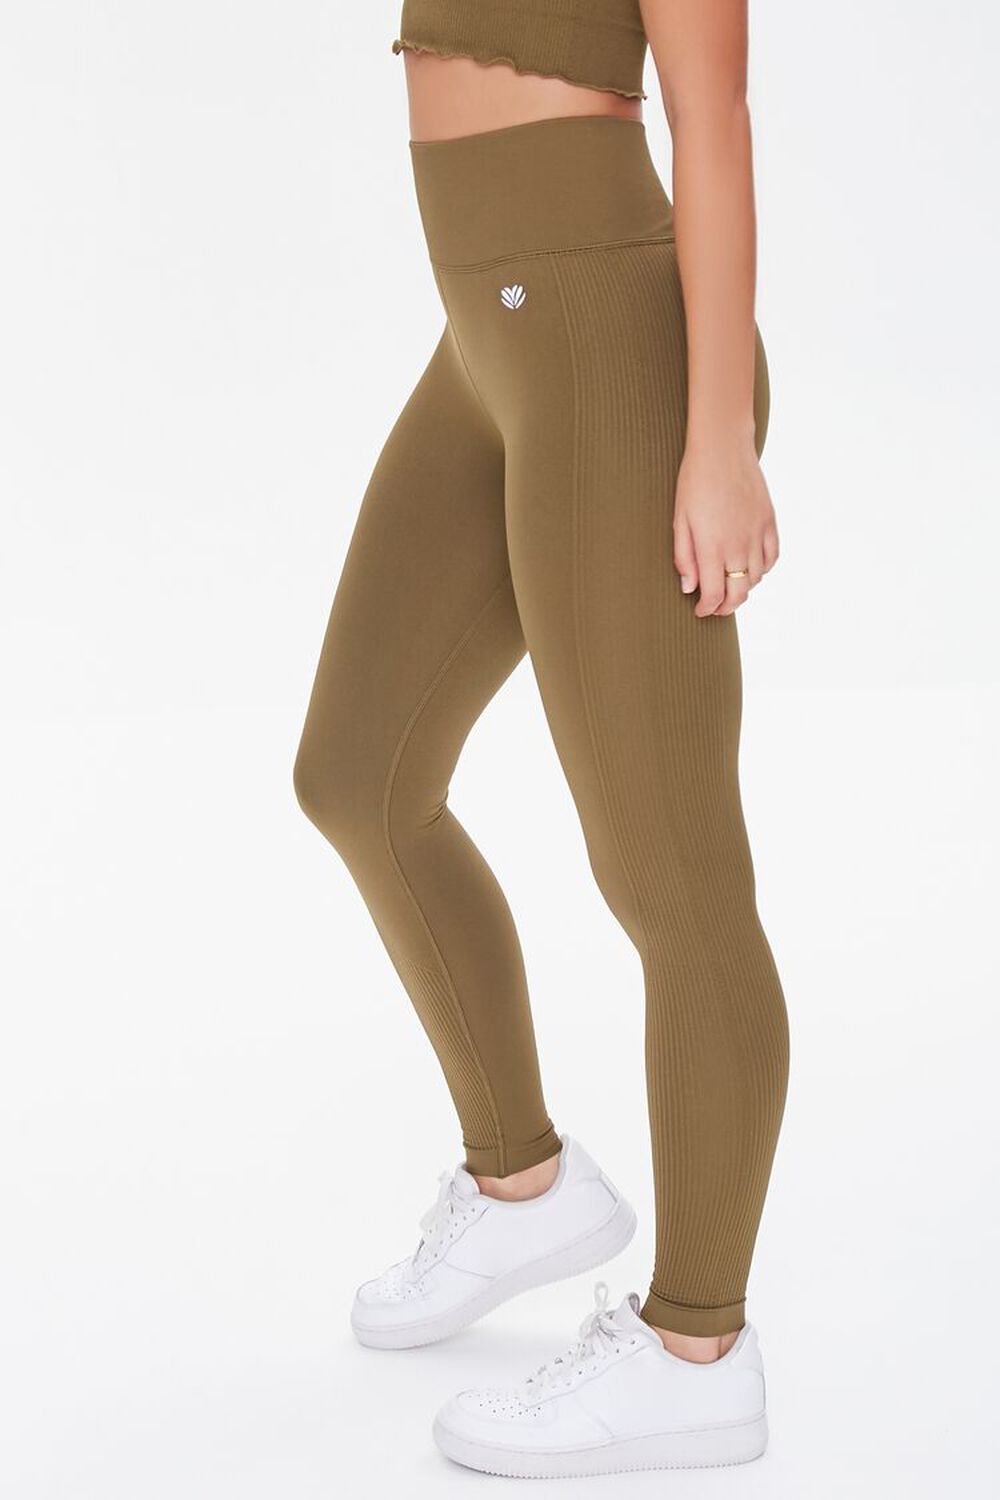 OLIVE Active Seamless Ribbed High-Rise Leggings, image 3